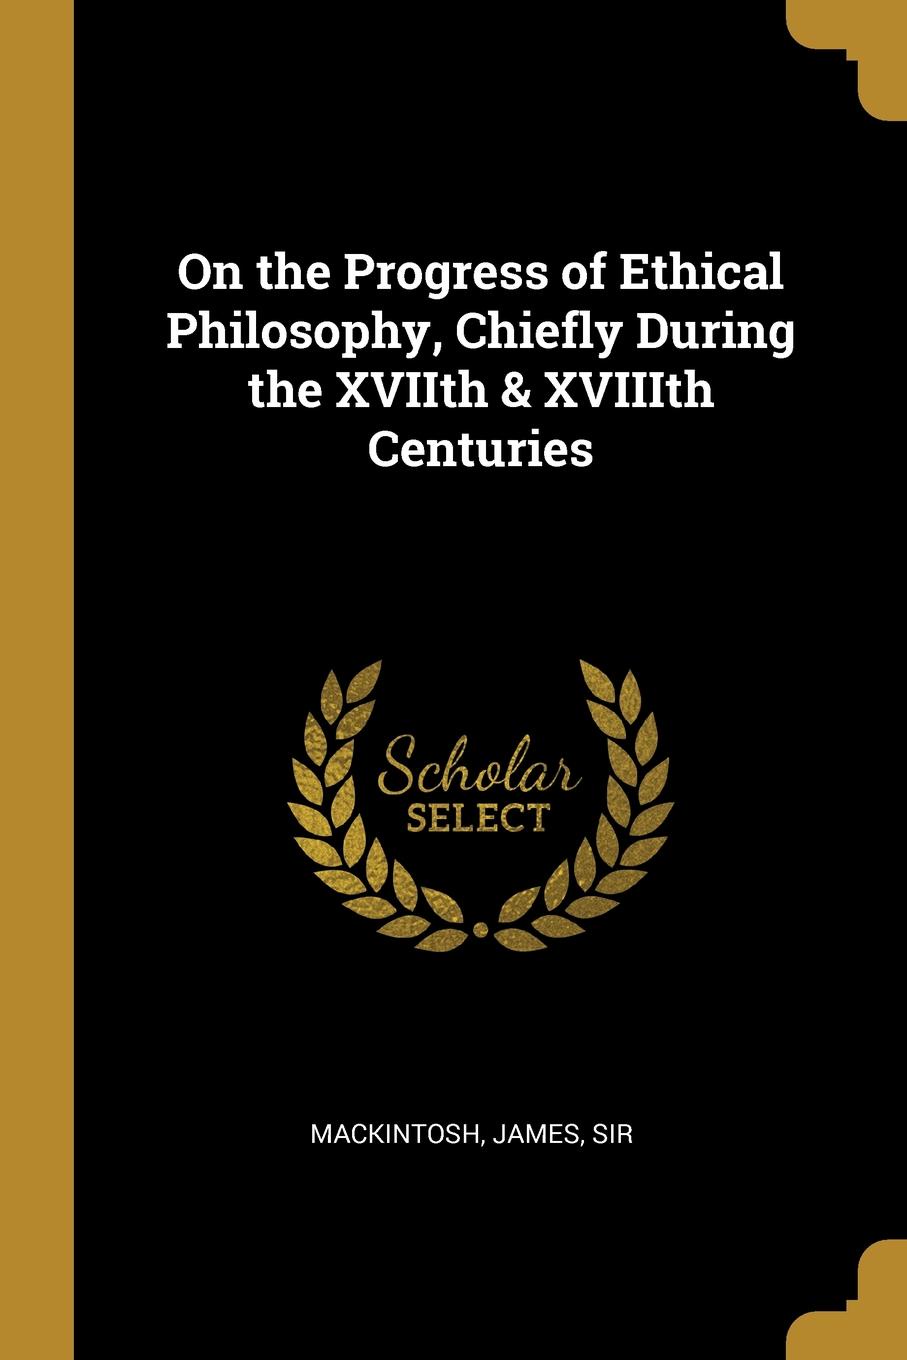 On the Progress of Ethical Philosophy, Chiefly During the XVIIth . XVIIIth Centuries